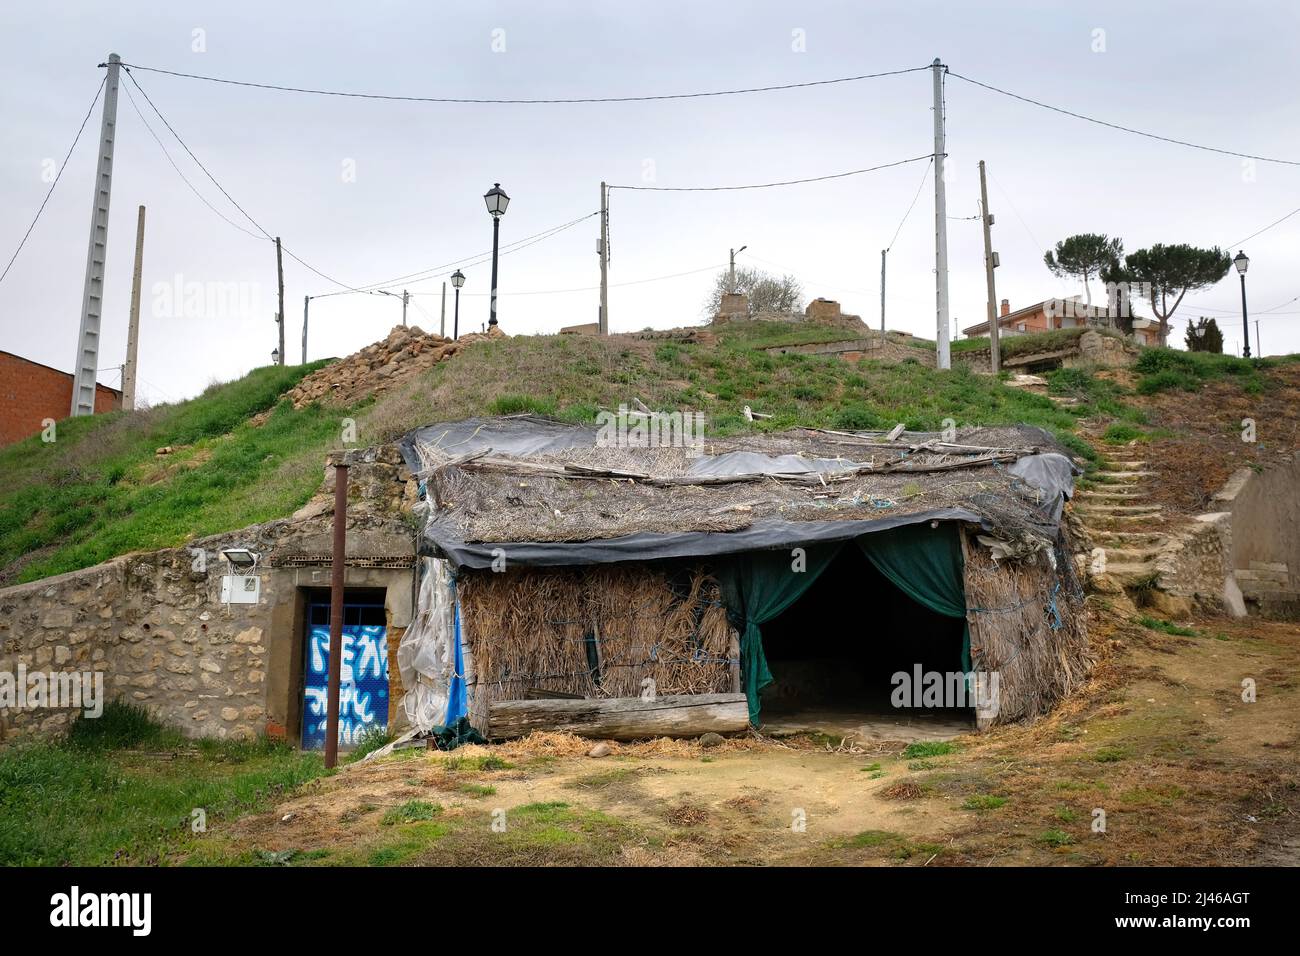 Makeshift, gymcrack entrance to one of the underground bodegas used for wine storage in Venialbo, Zamora, Castile and León, Spain Stock Photo